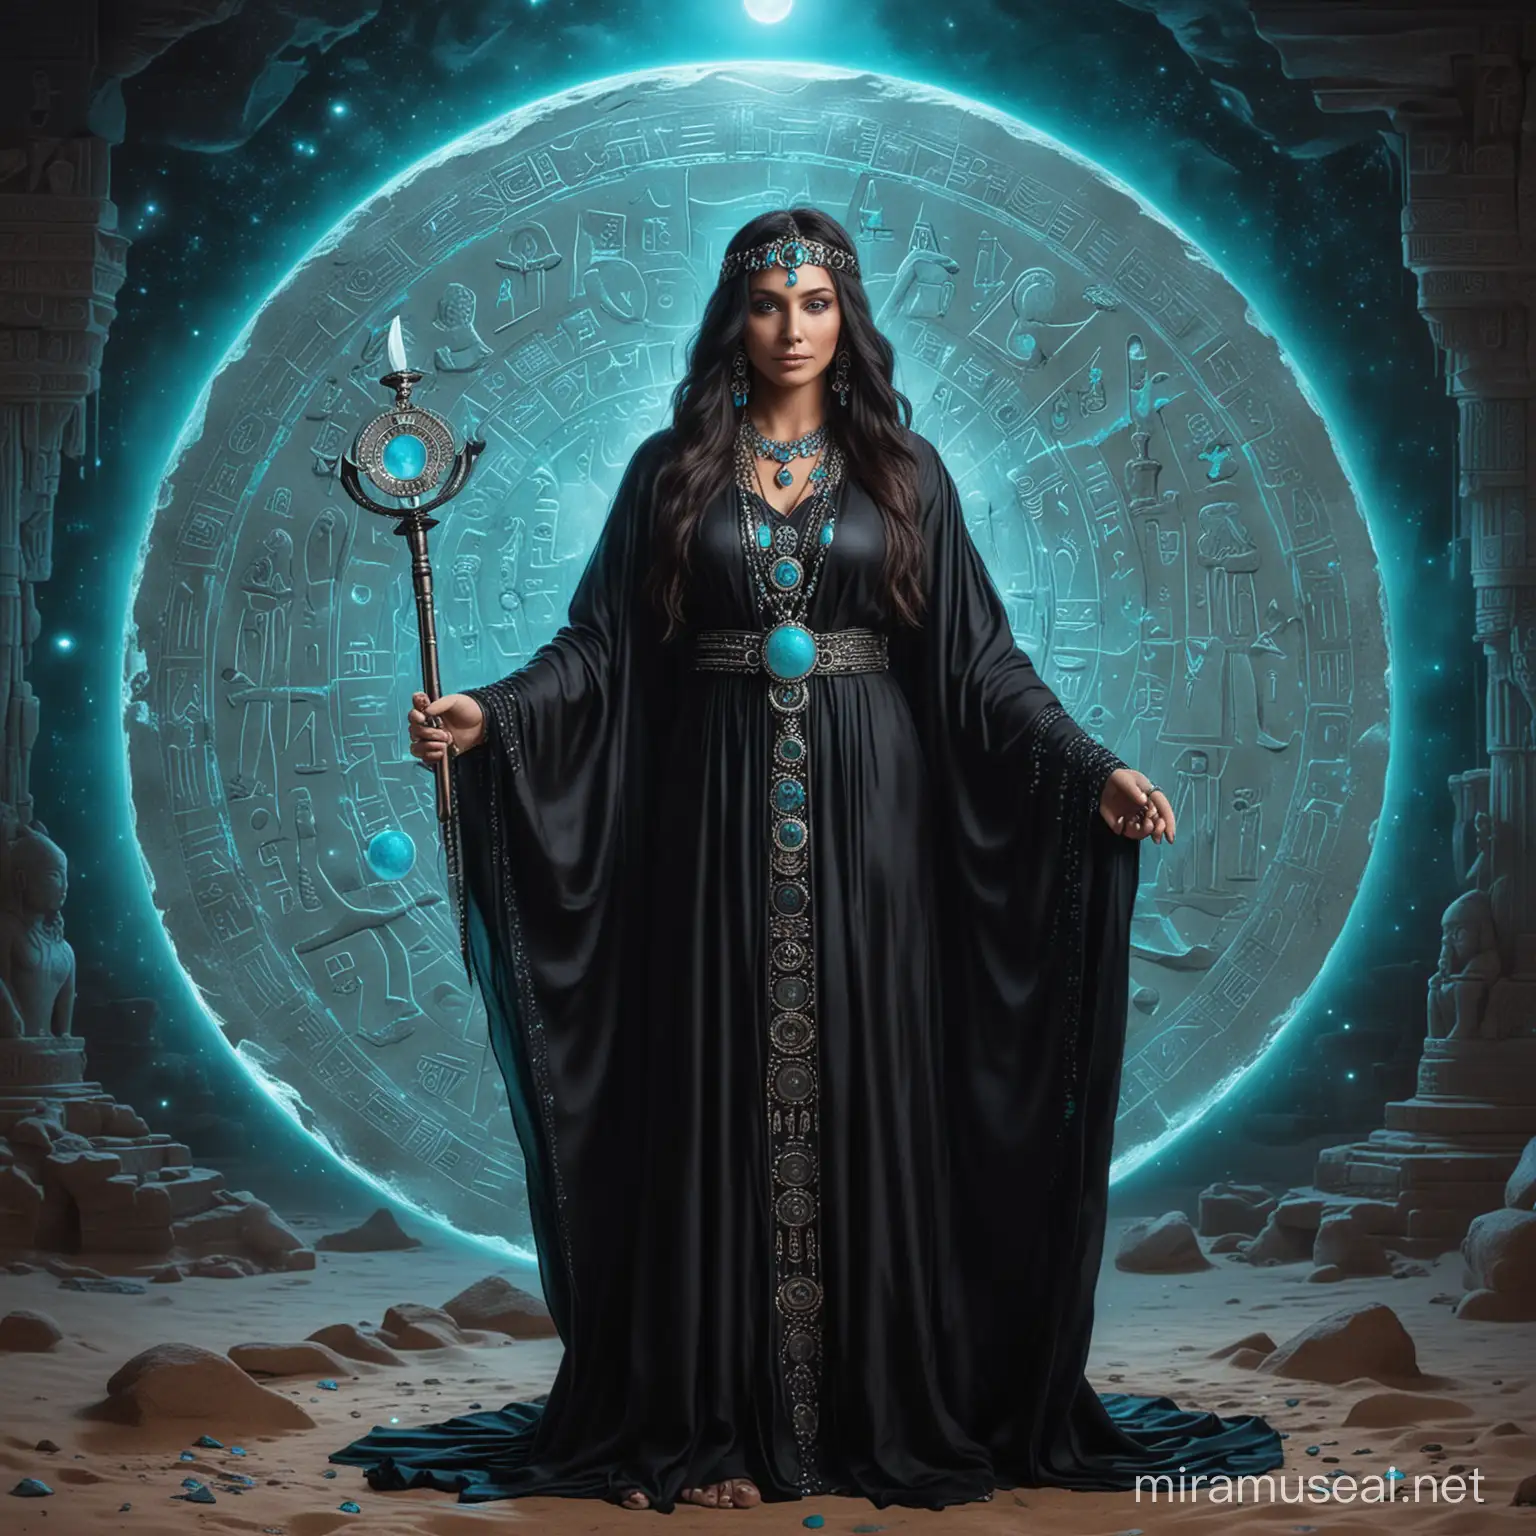 Mystical Goddess of Dark Magic with Turquoise Orb and Lunar Disc